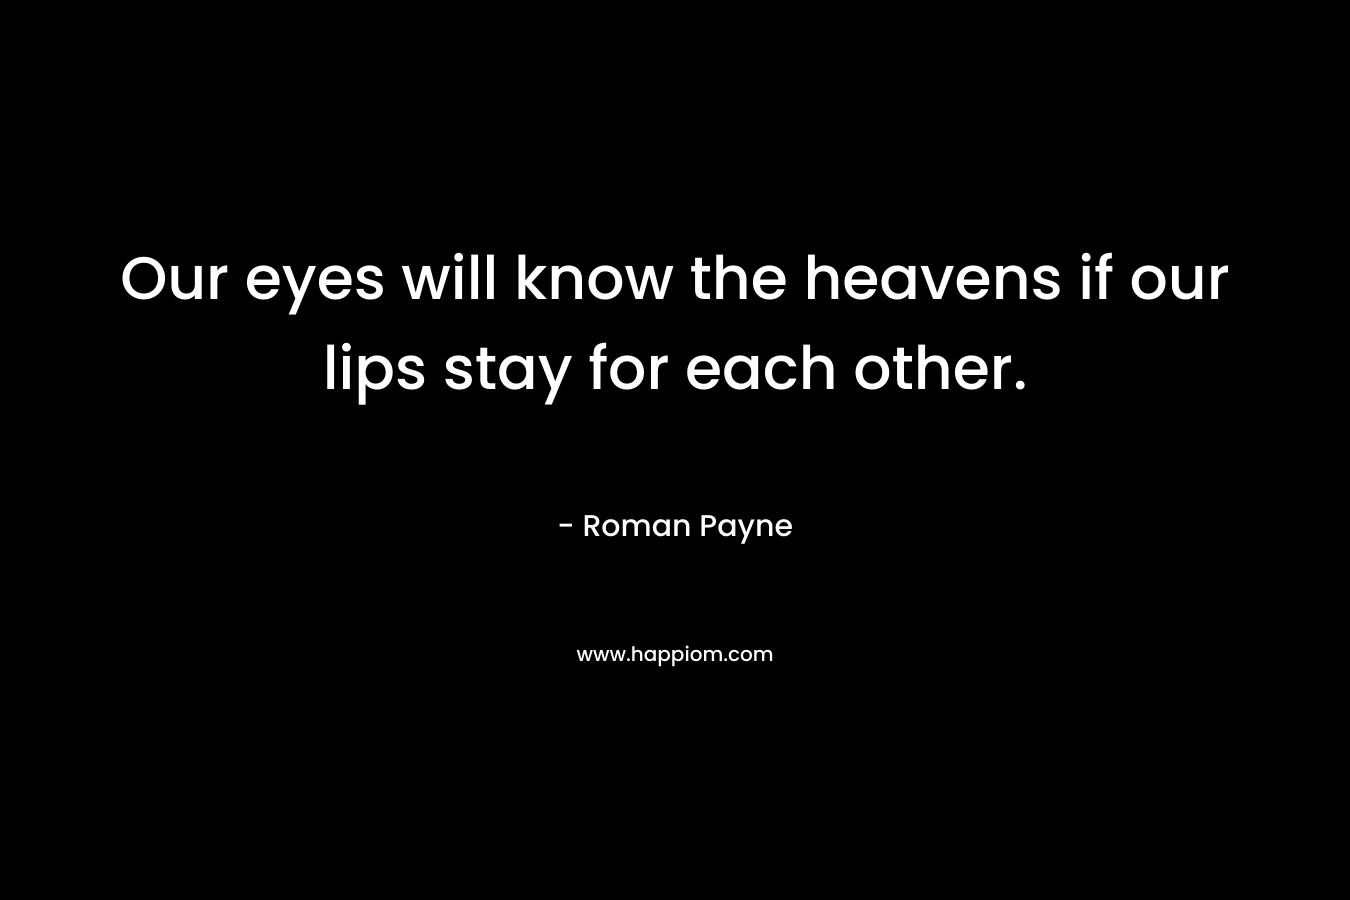 Our eyes will know the heavens if our lips stay for each other. – Roman Payne